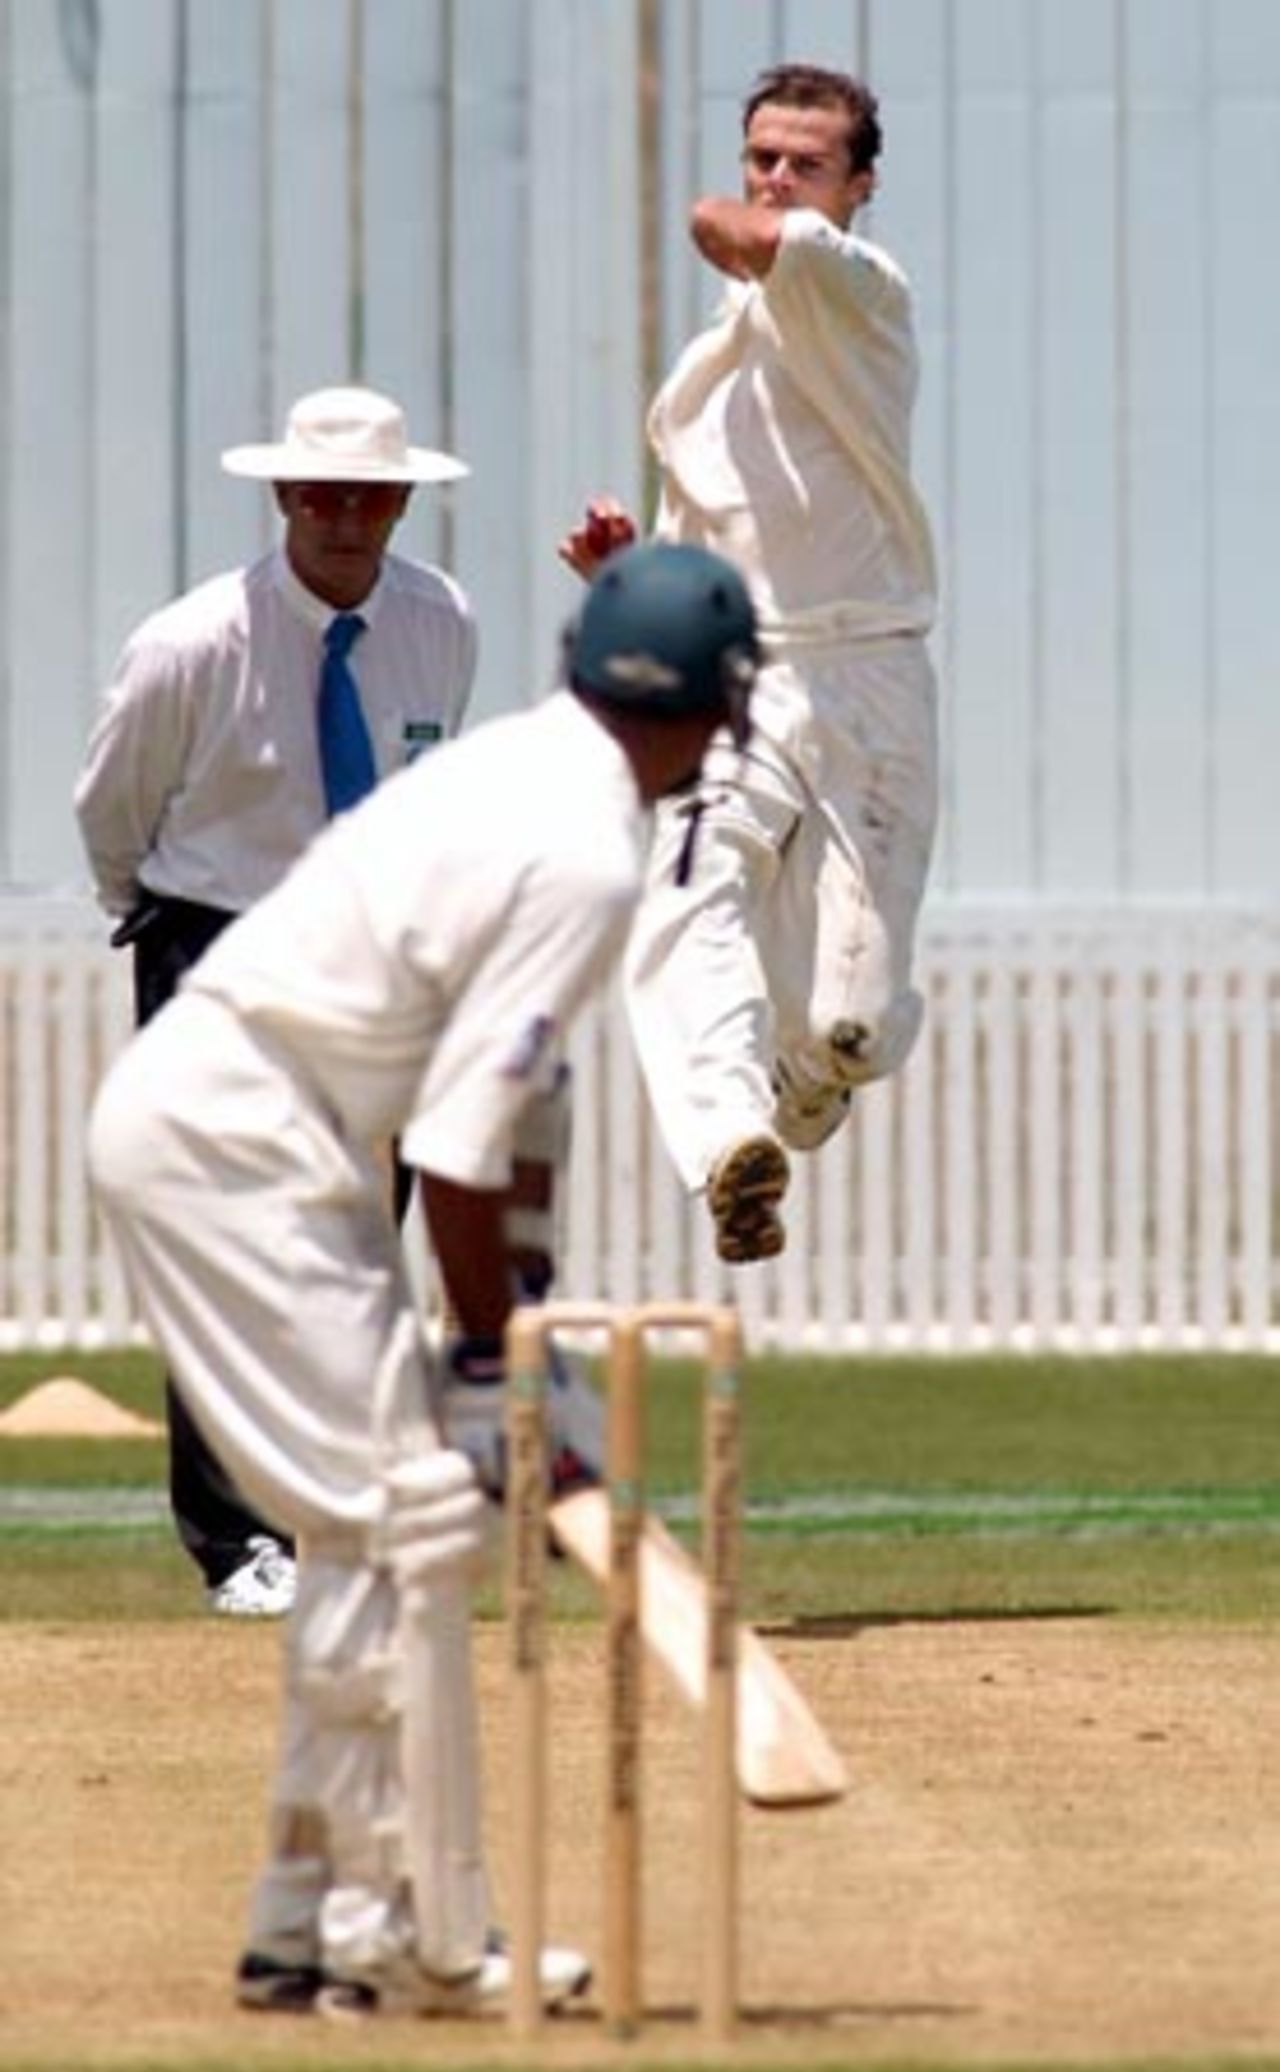 New Zealand bowler Chris Martin leaps as he is about to deliver a ball to Bangladesh batsman Habibul Bashar during his first innings spell of 1-38 from 11 overs. Umpire Tony Hill looks on. 1st Test: New Zealand v Bangladesh at WestpacTrust Park, Hamilton, 18-22 Dec 2001 (21 December 2001).